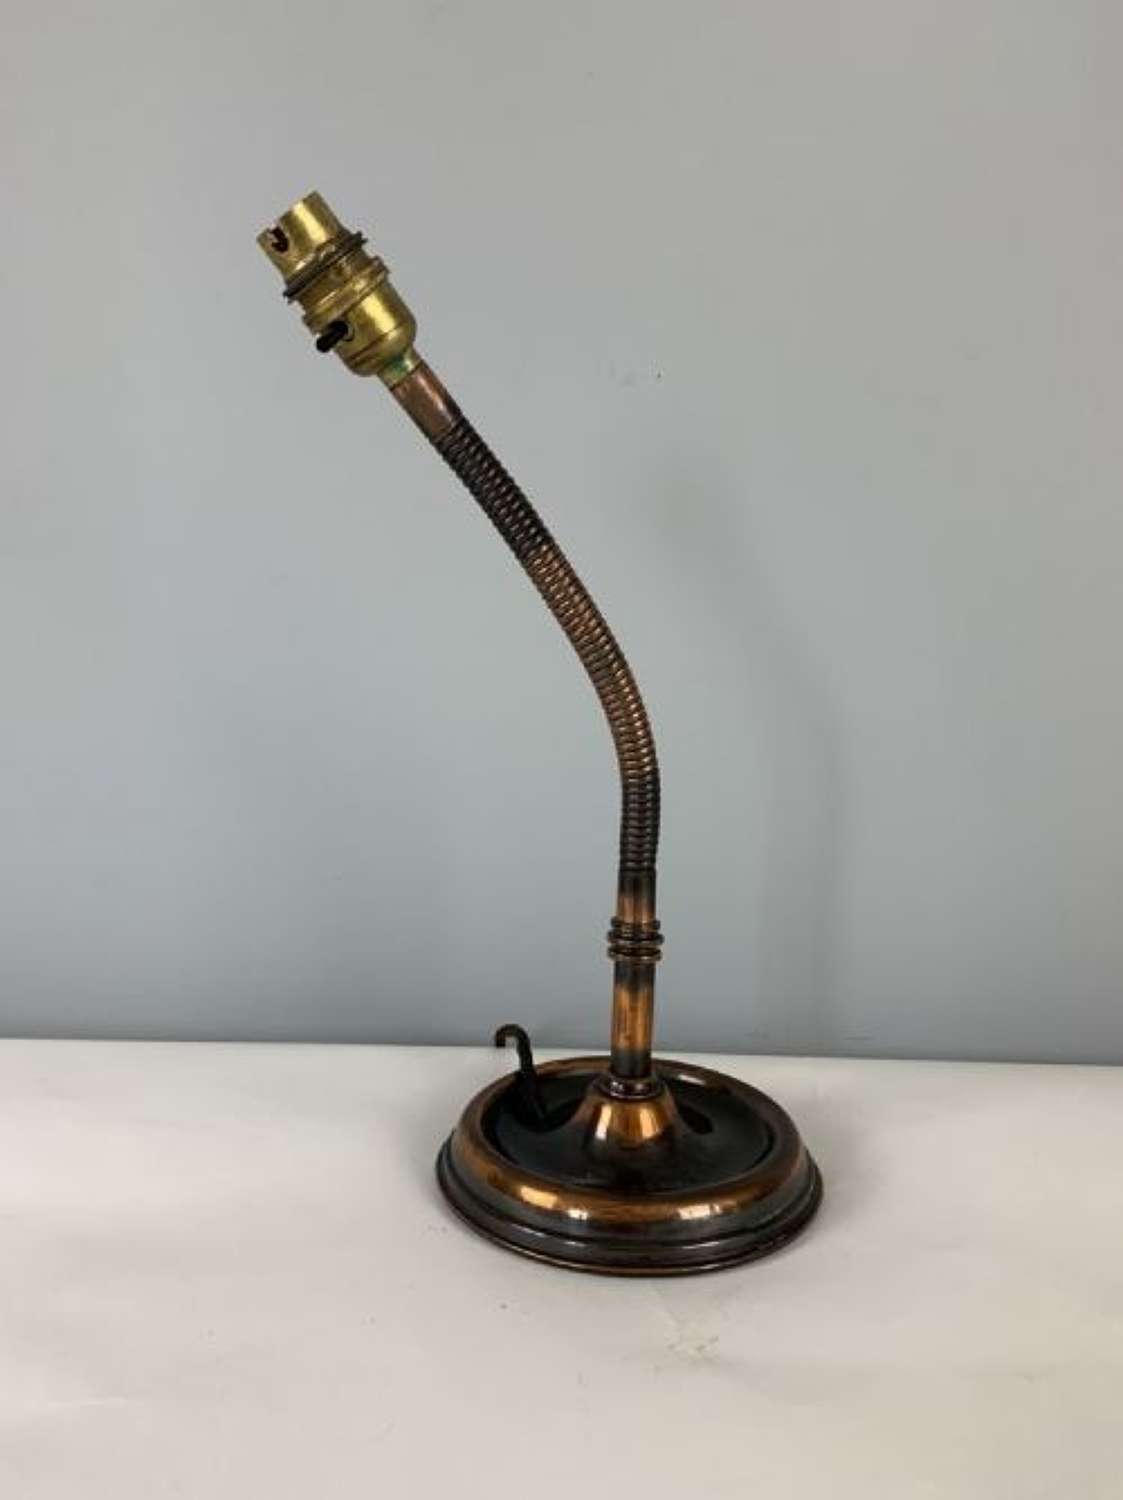 1930s Coppered Brass Bendy Table Desk Lamp, Rewired And Pat Tested